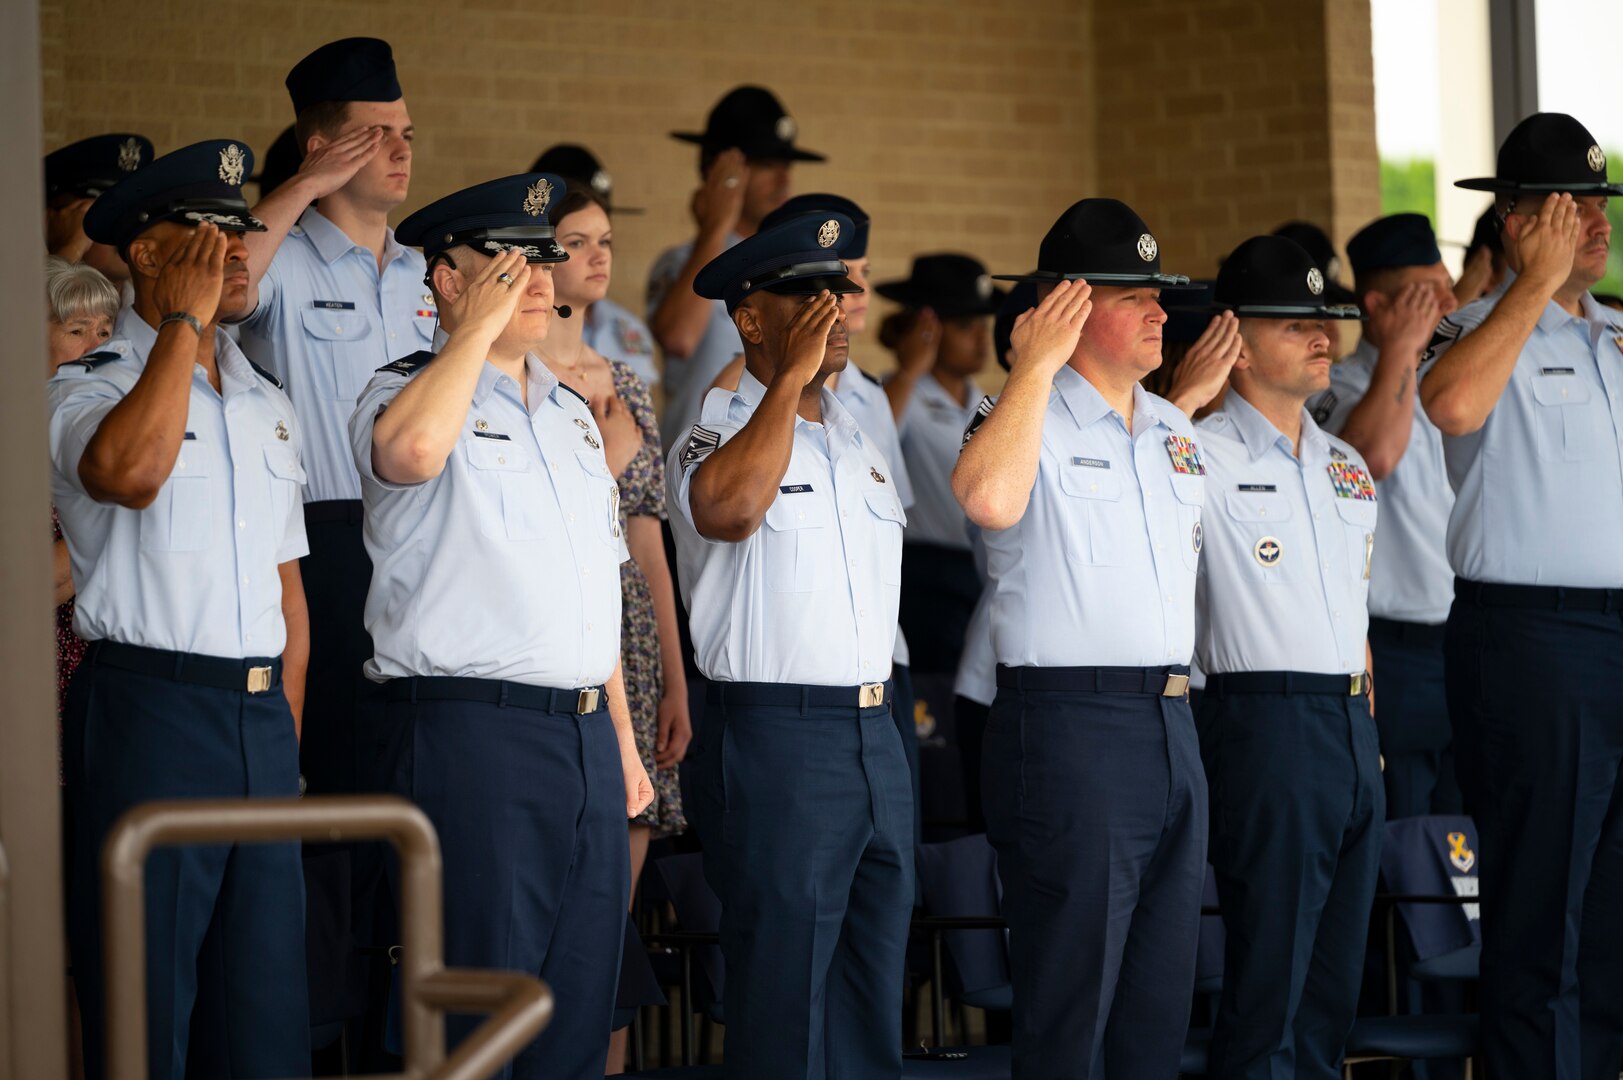 Col Power and Chief Cooper are seen saluting